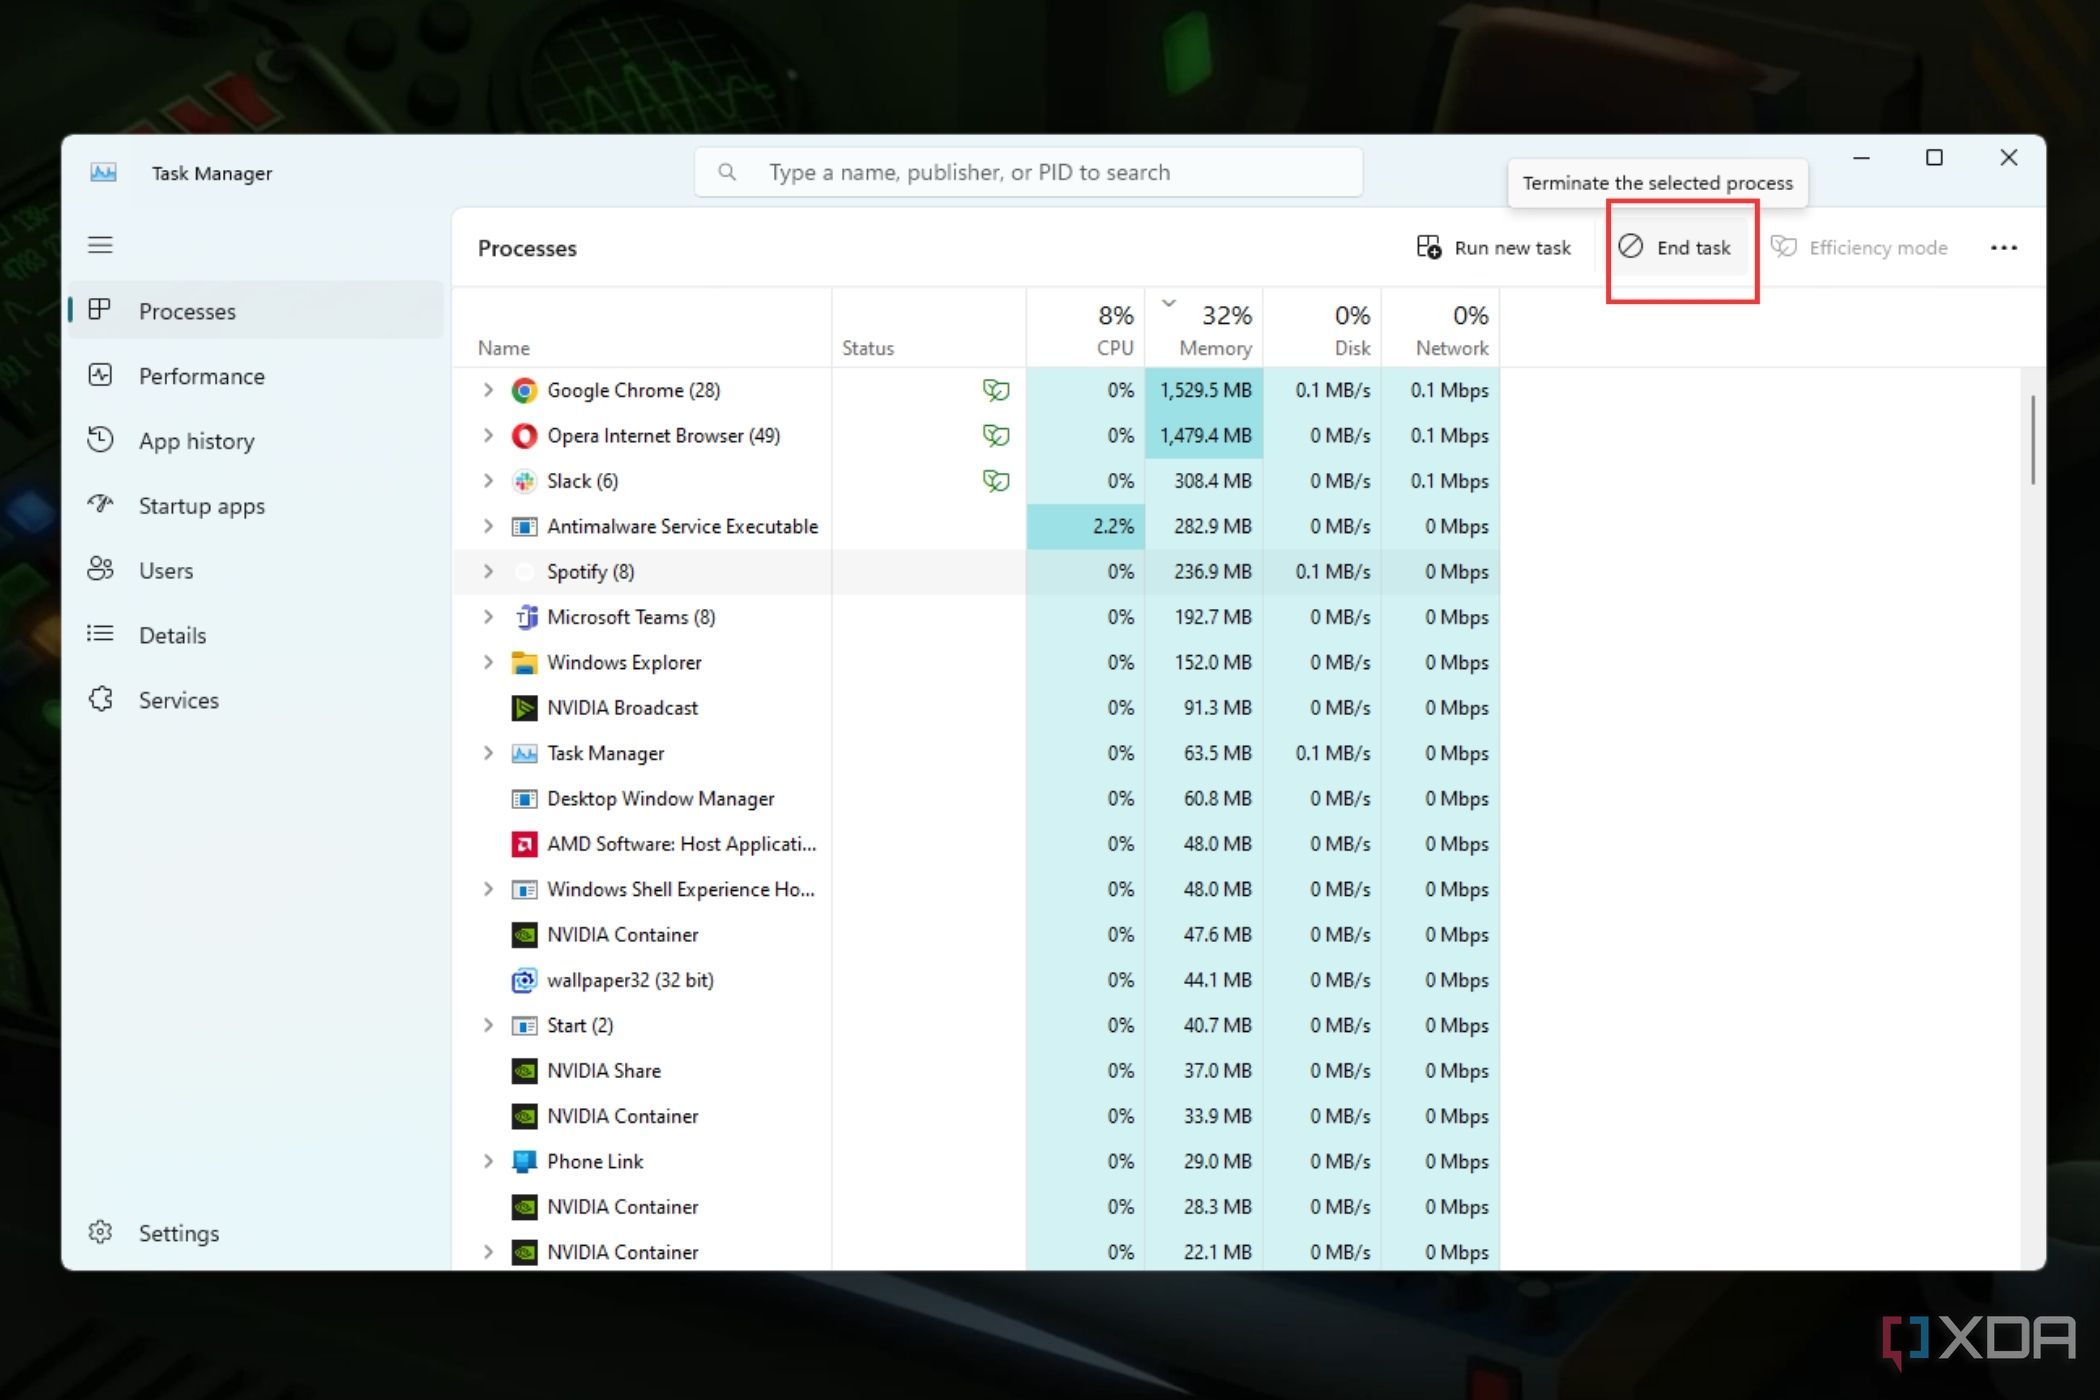 A screenshot showing the highlighted end task button in Task Manager.